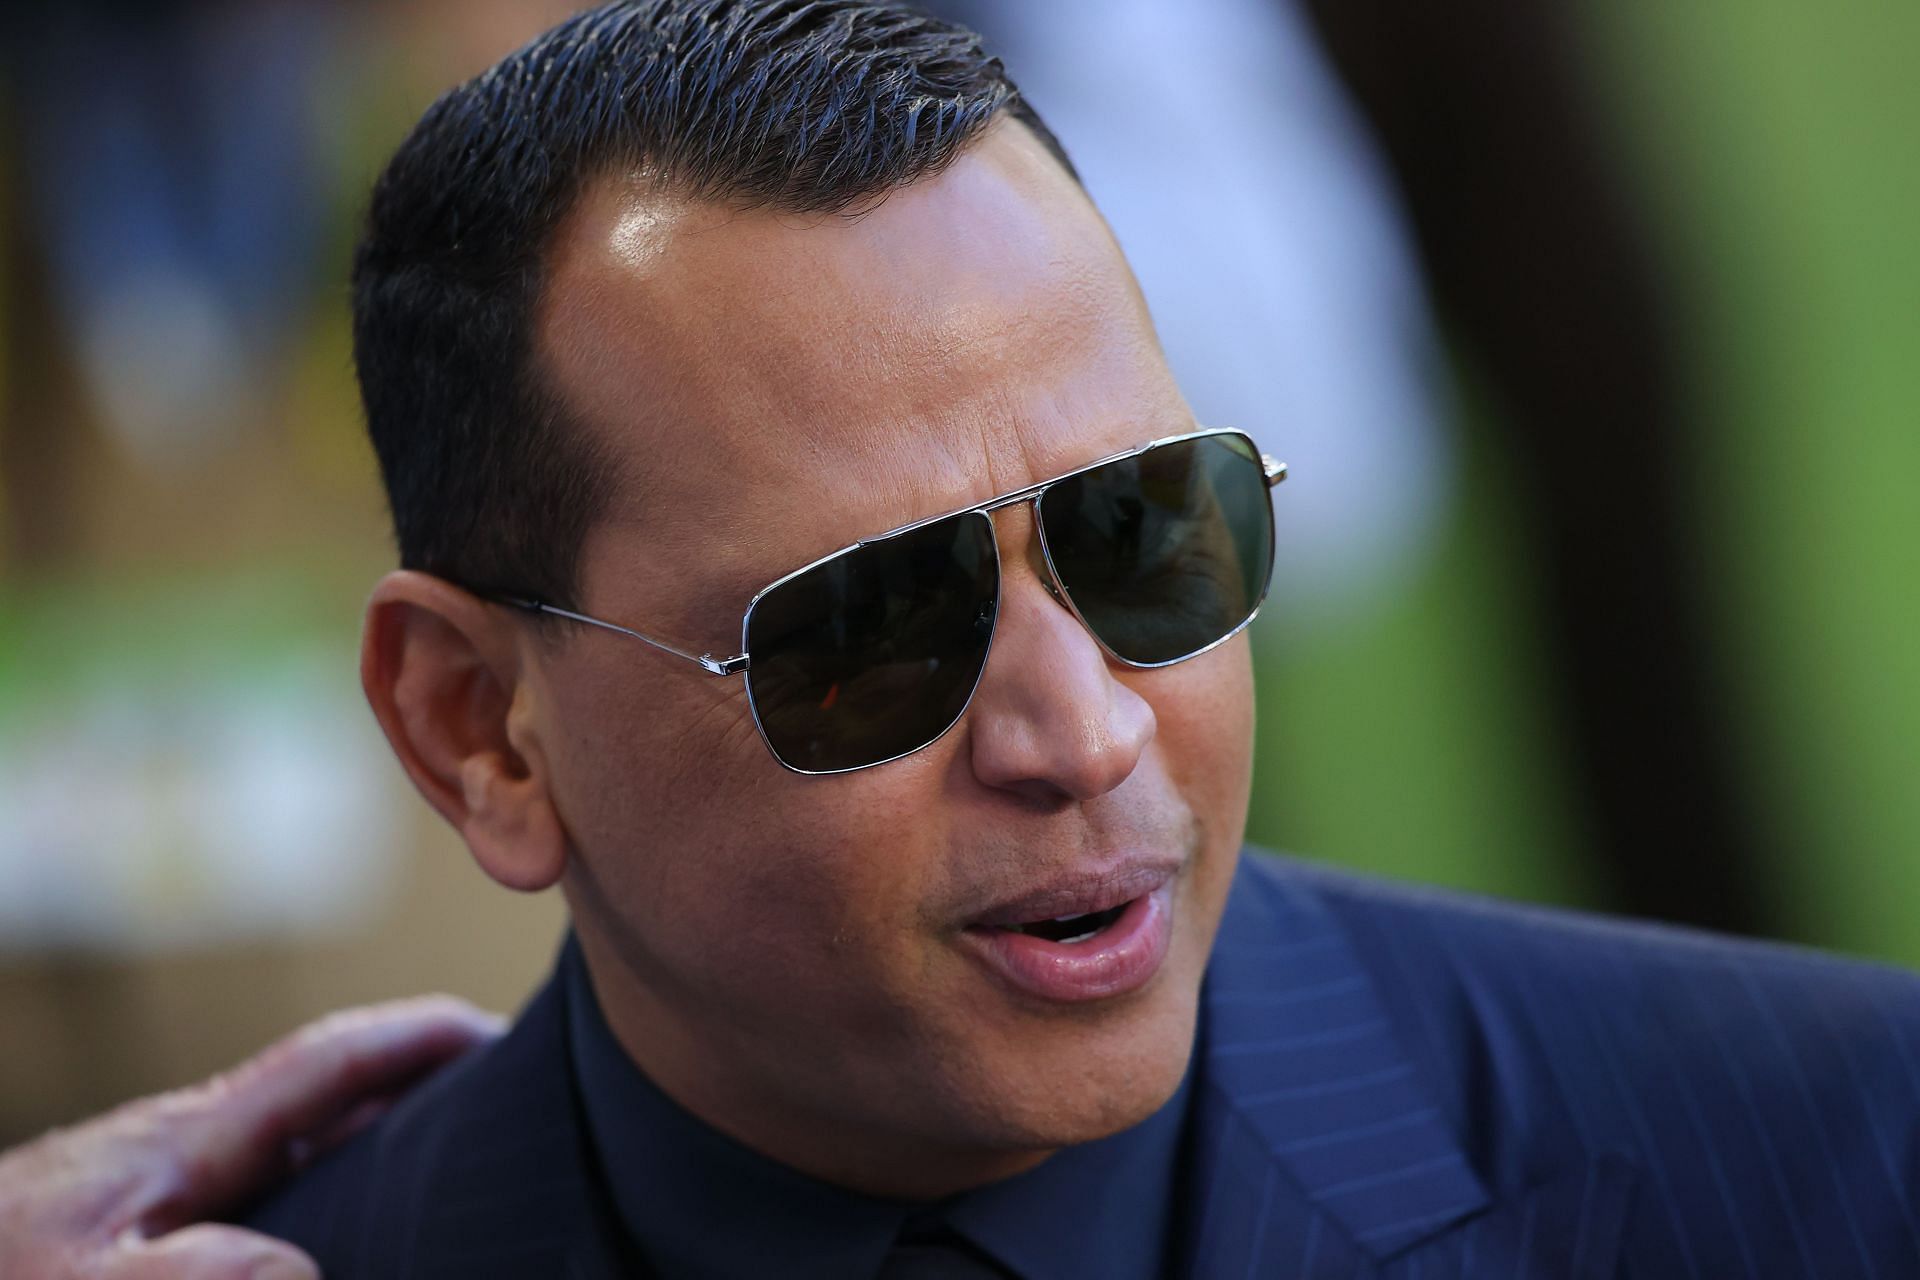 Alex Rodriguez is considered one of the greats, but his PED use may prevent further honors.